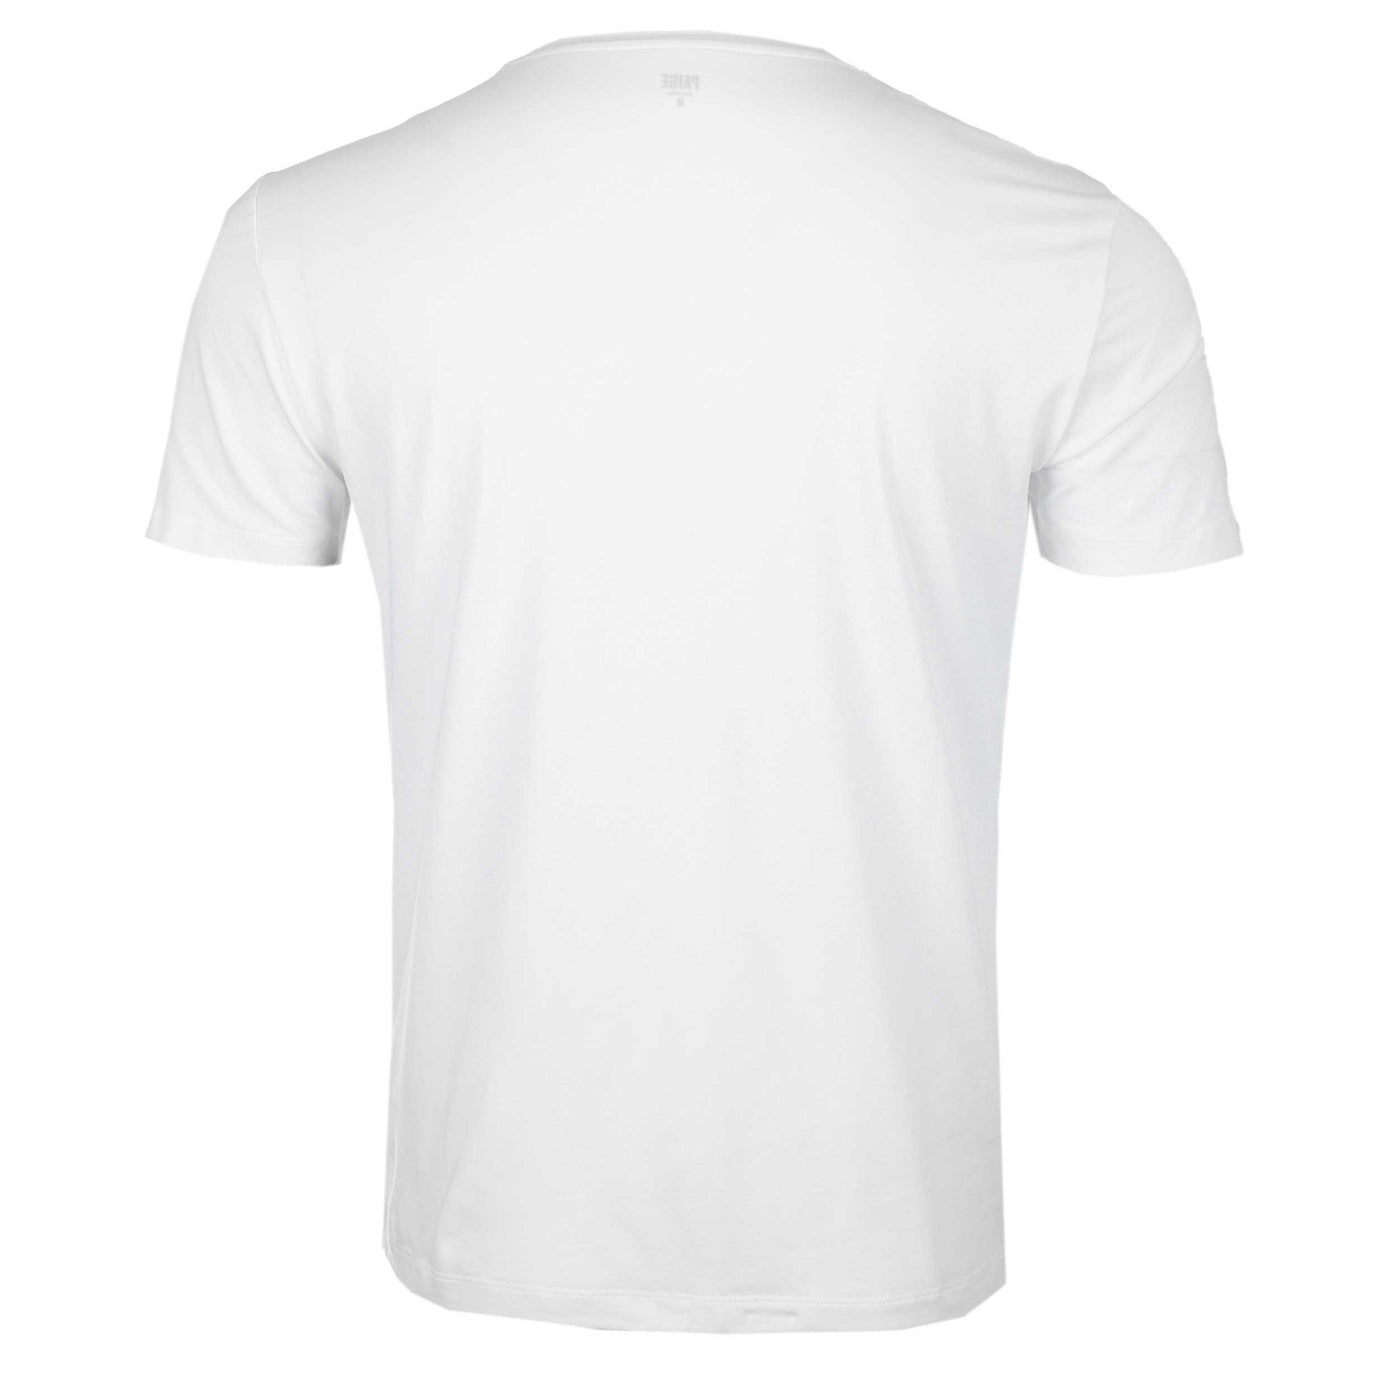 Paige Cash T Shirt in White Back